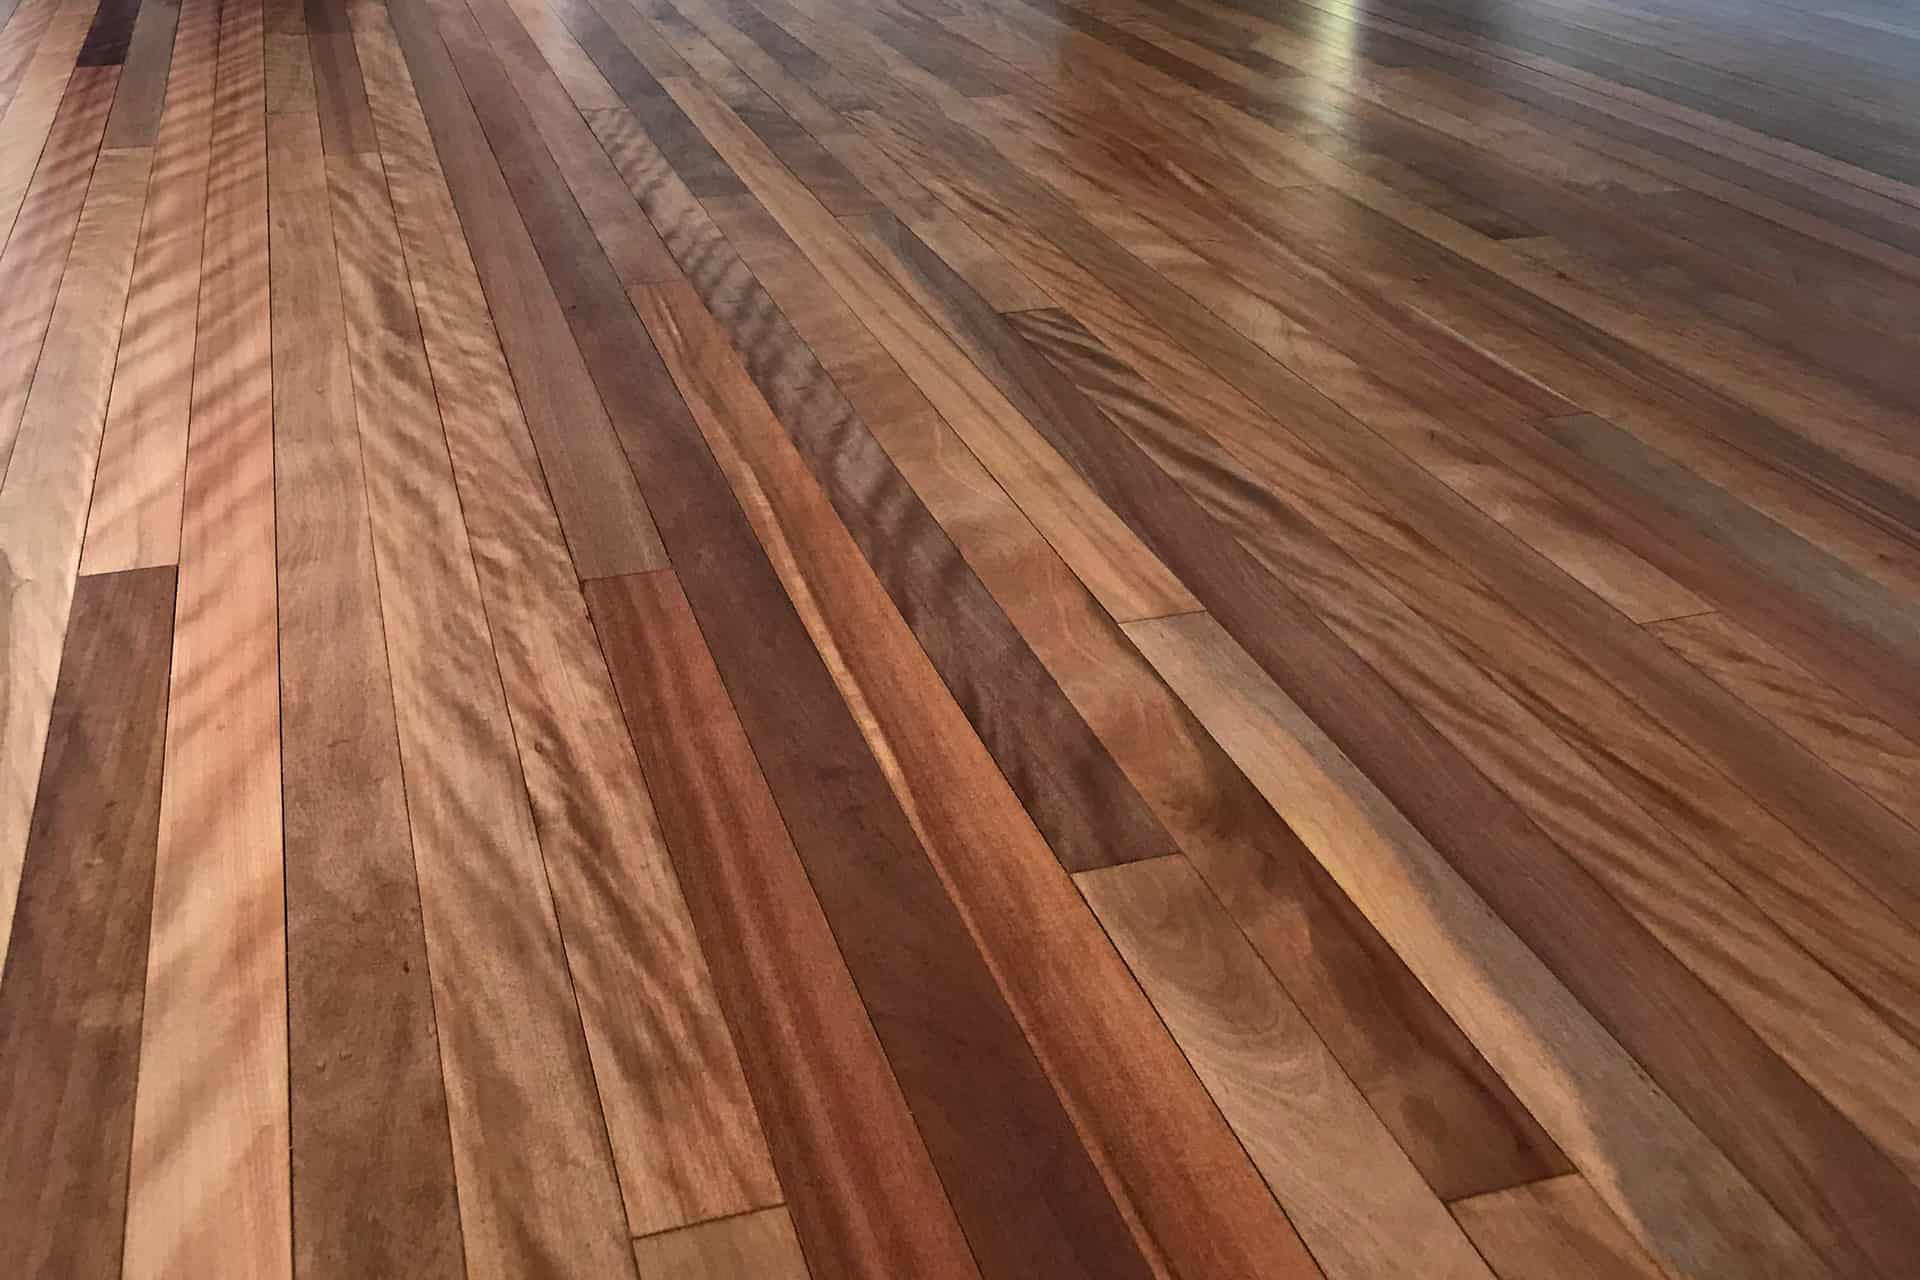 sanded and polished wooden flooring